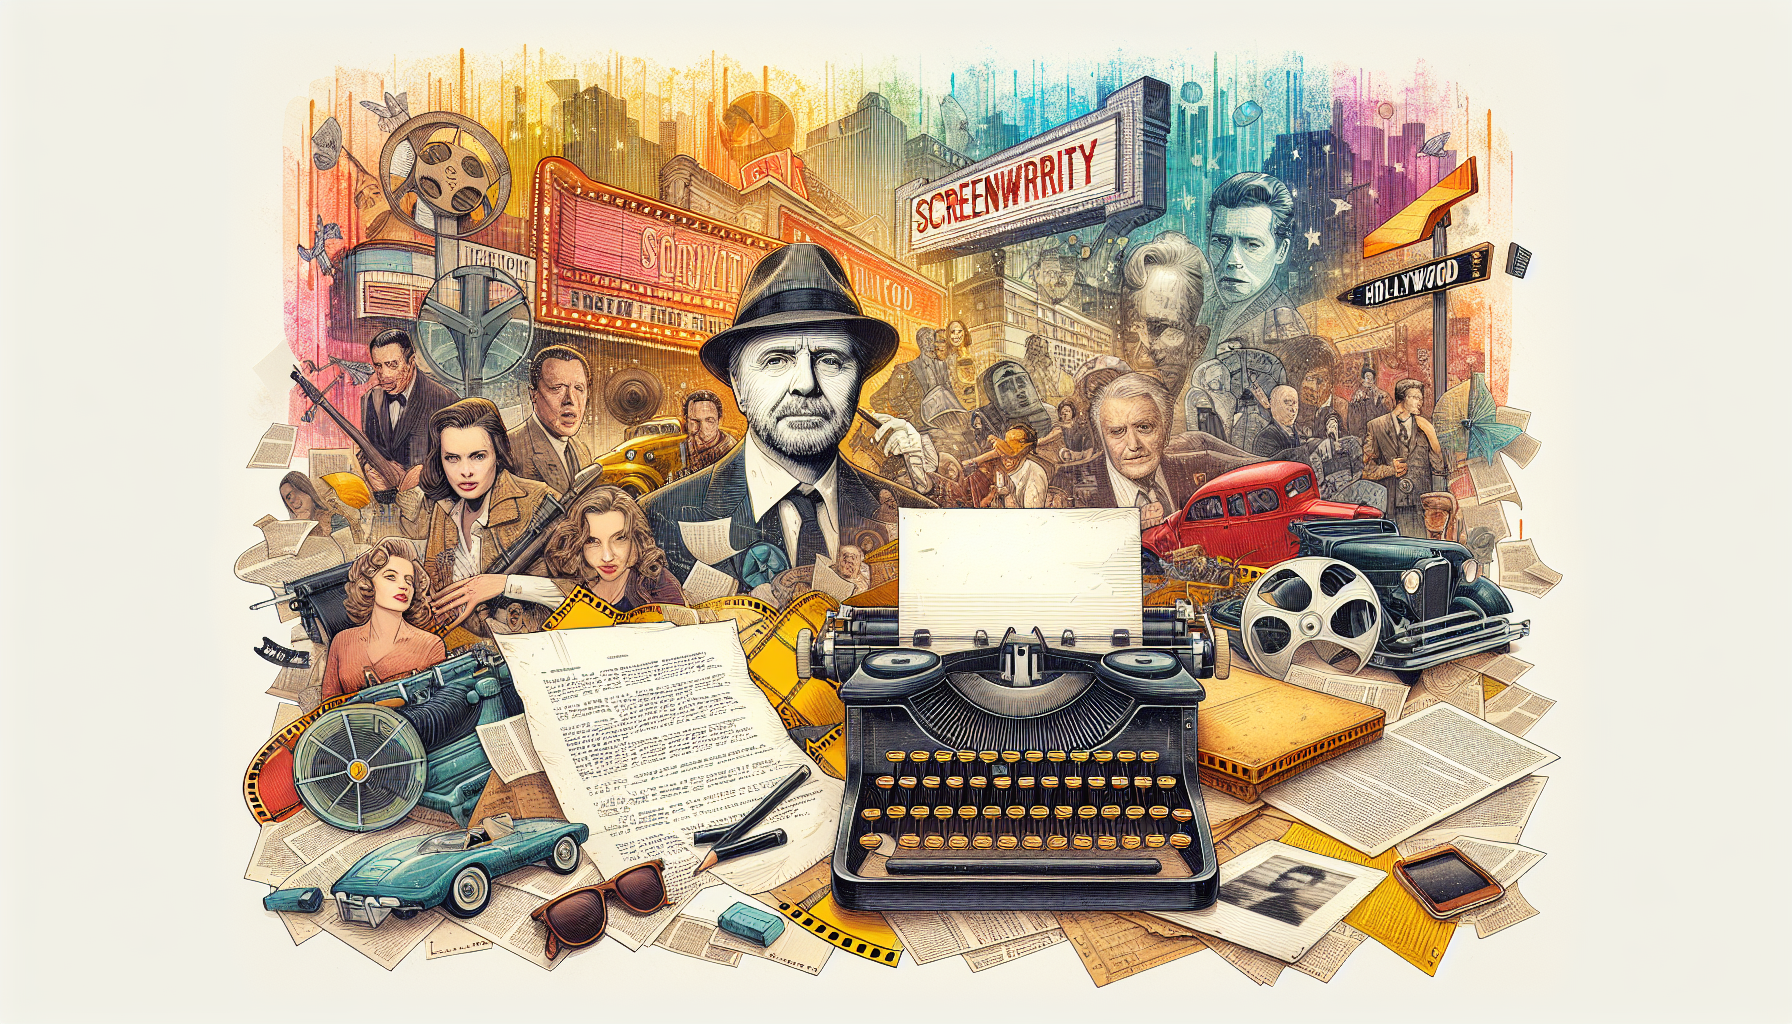 An artistic collage celebrating the influential career of screenwriter Robert Towne, featuring iconic scenes from his movies, a vintage typewriter, scattered screenplay pages, and a fading Hollywood b